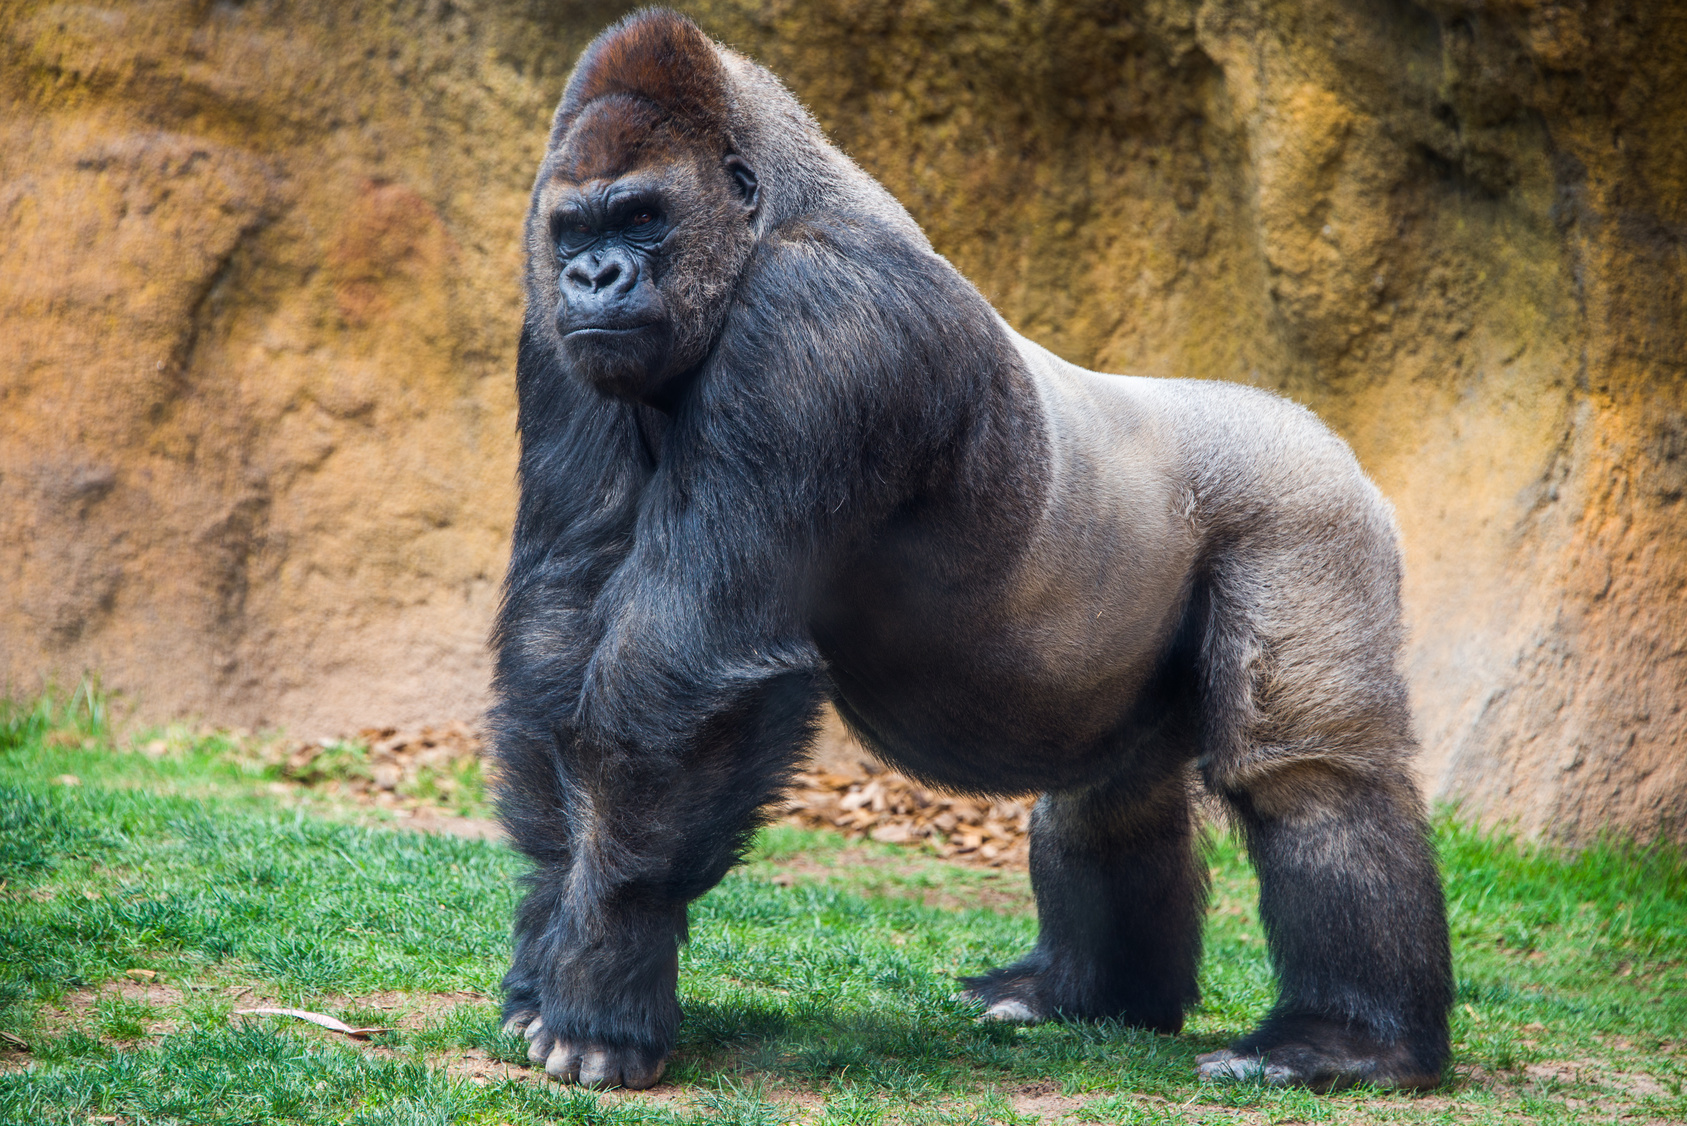 Gorillas are the Kings of the Jungle | Cool Kid Facts